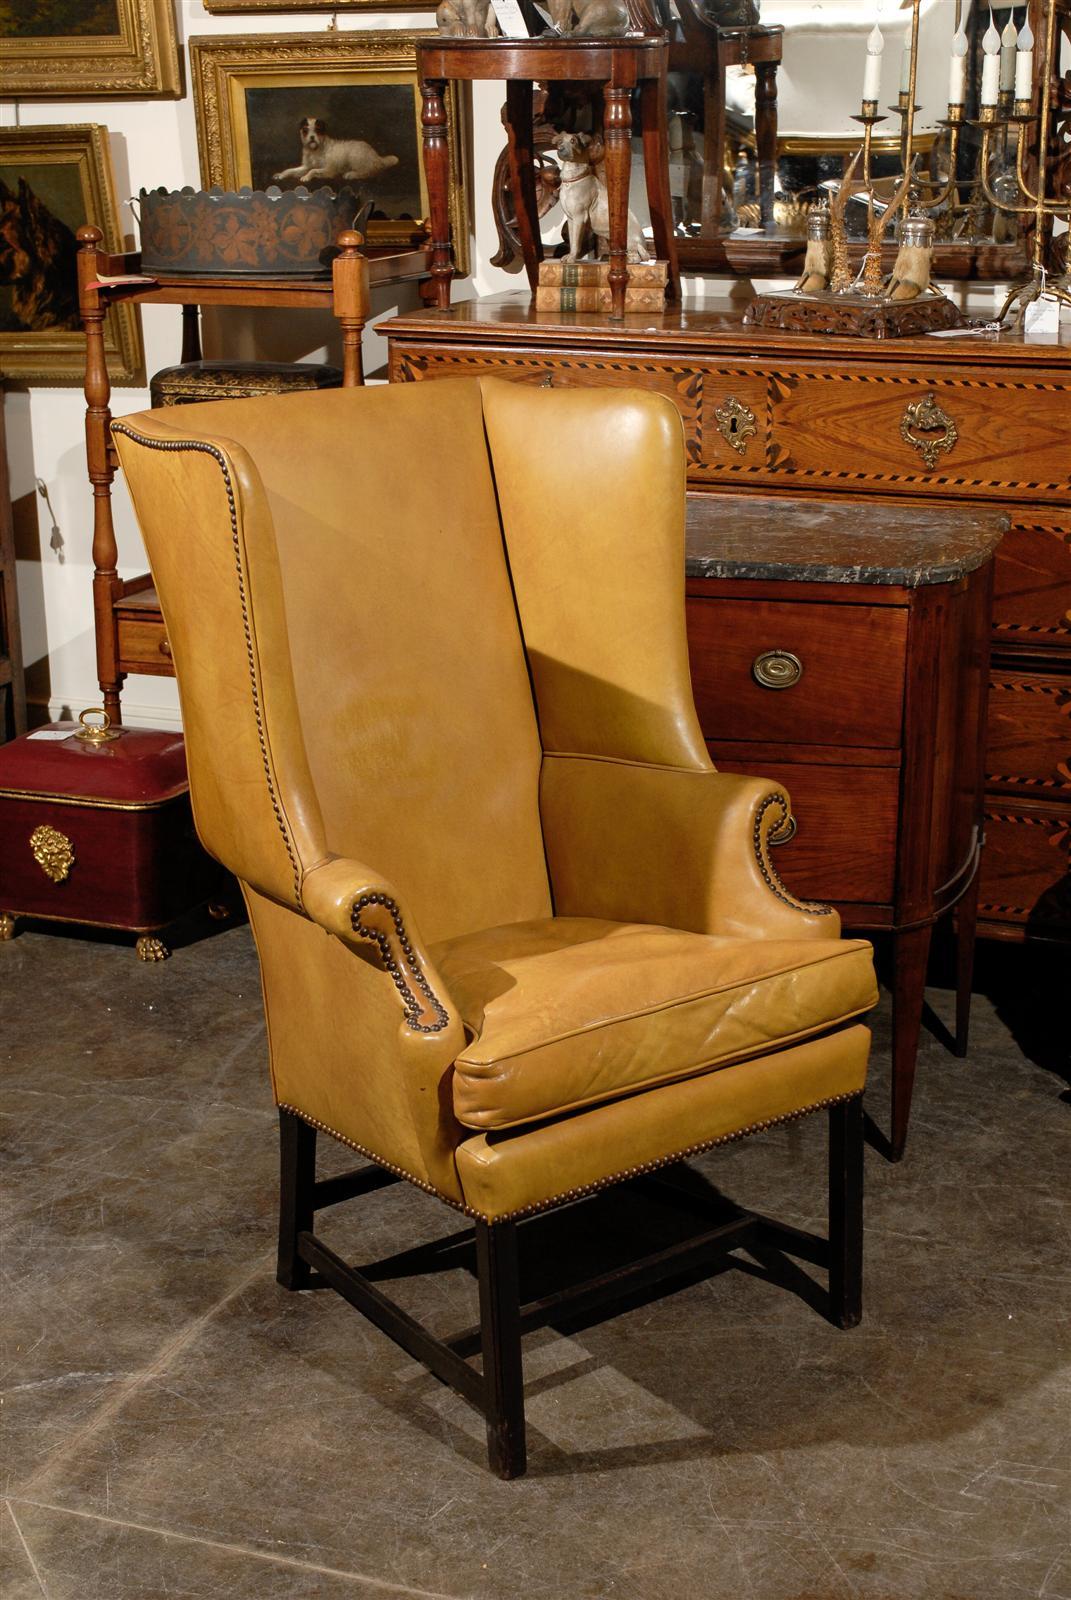 English leather wing chair in nice color.